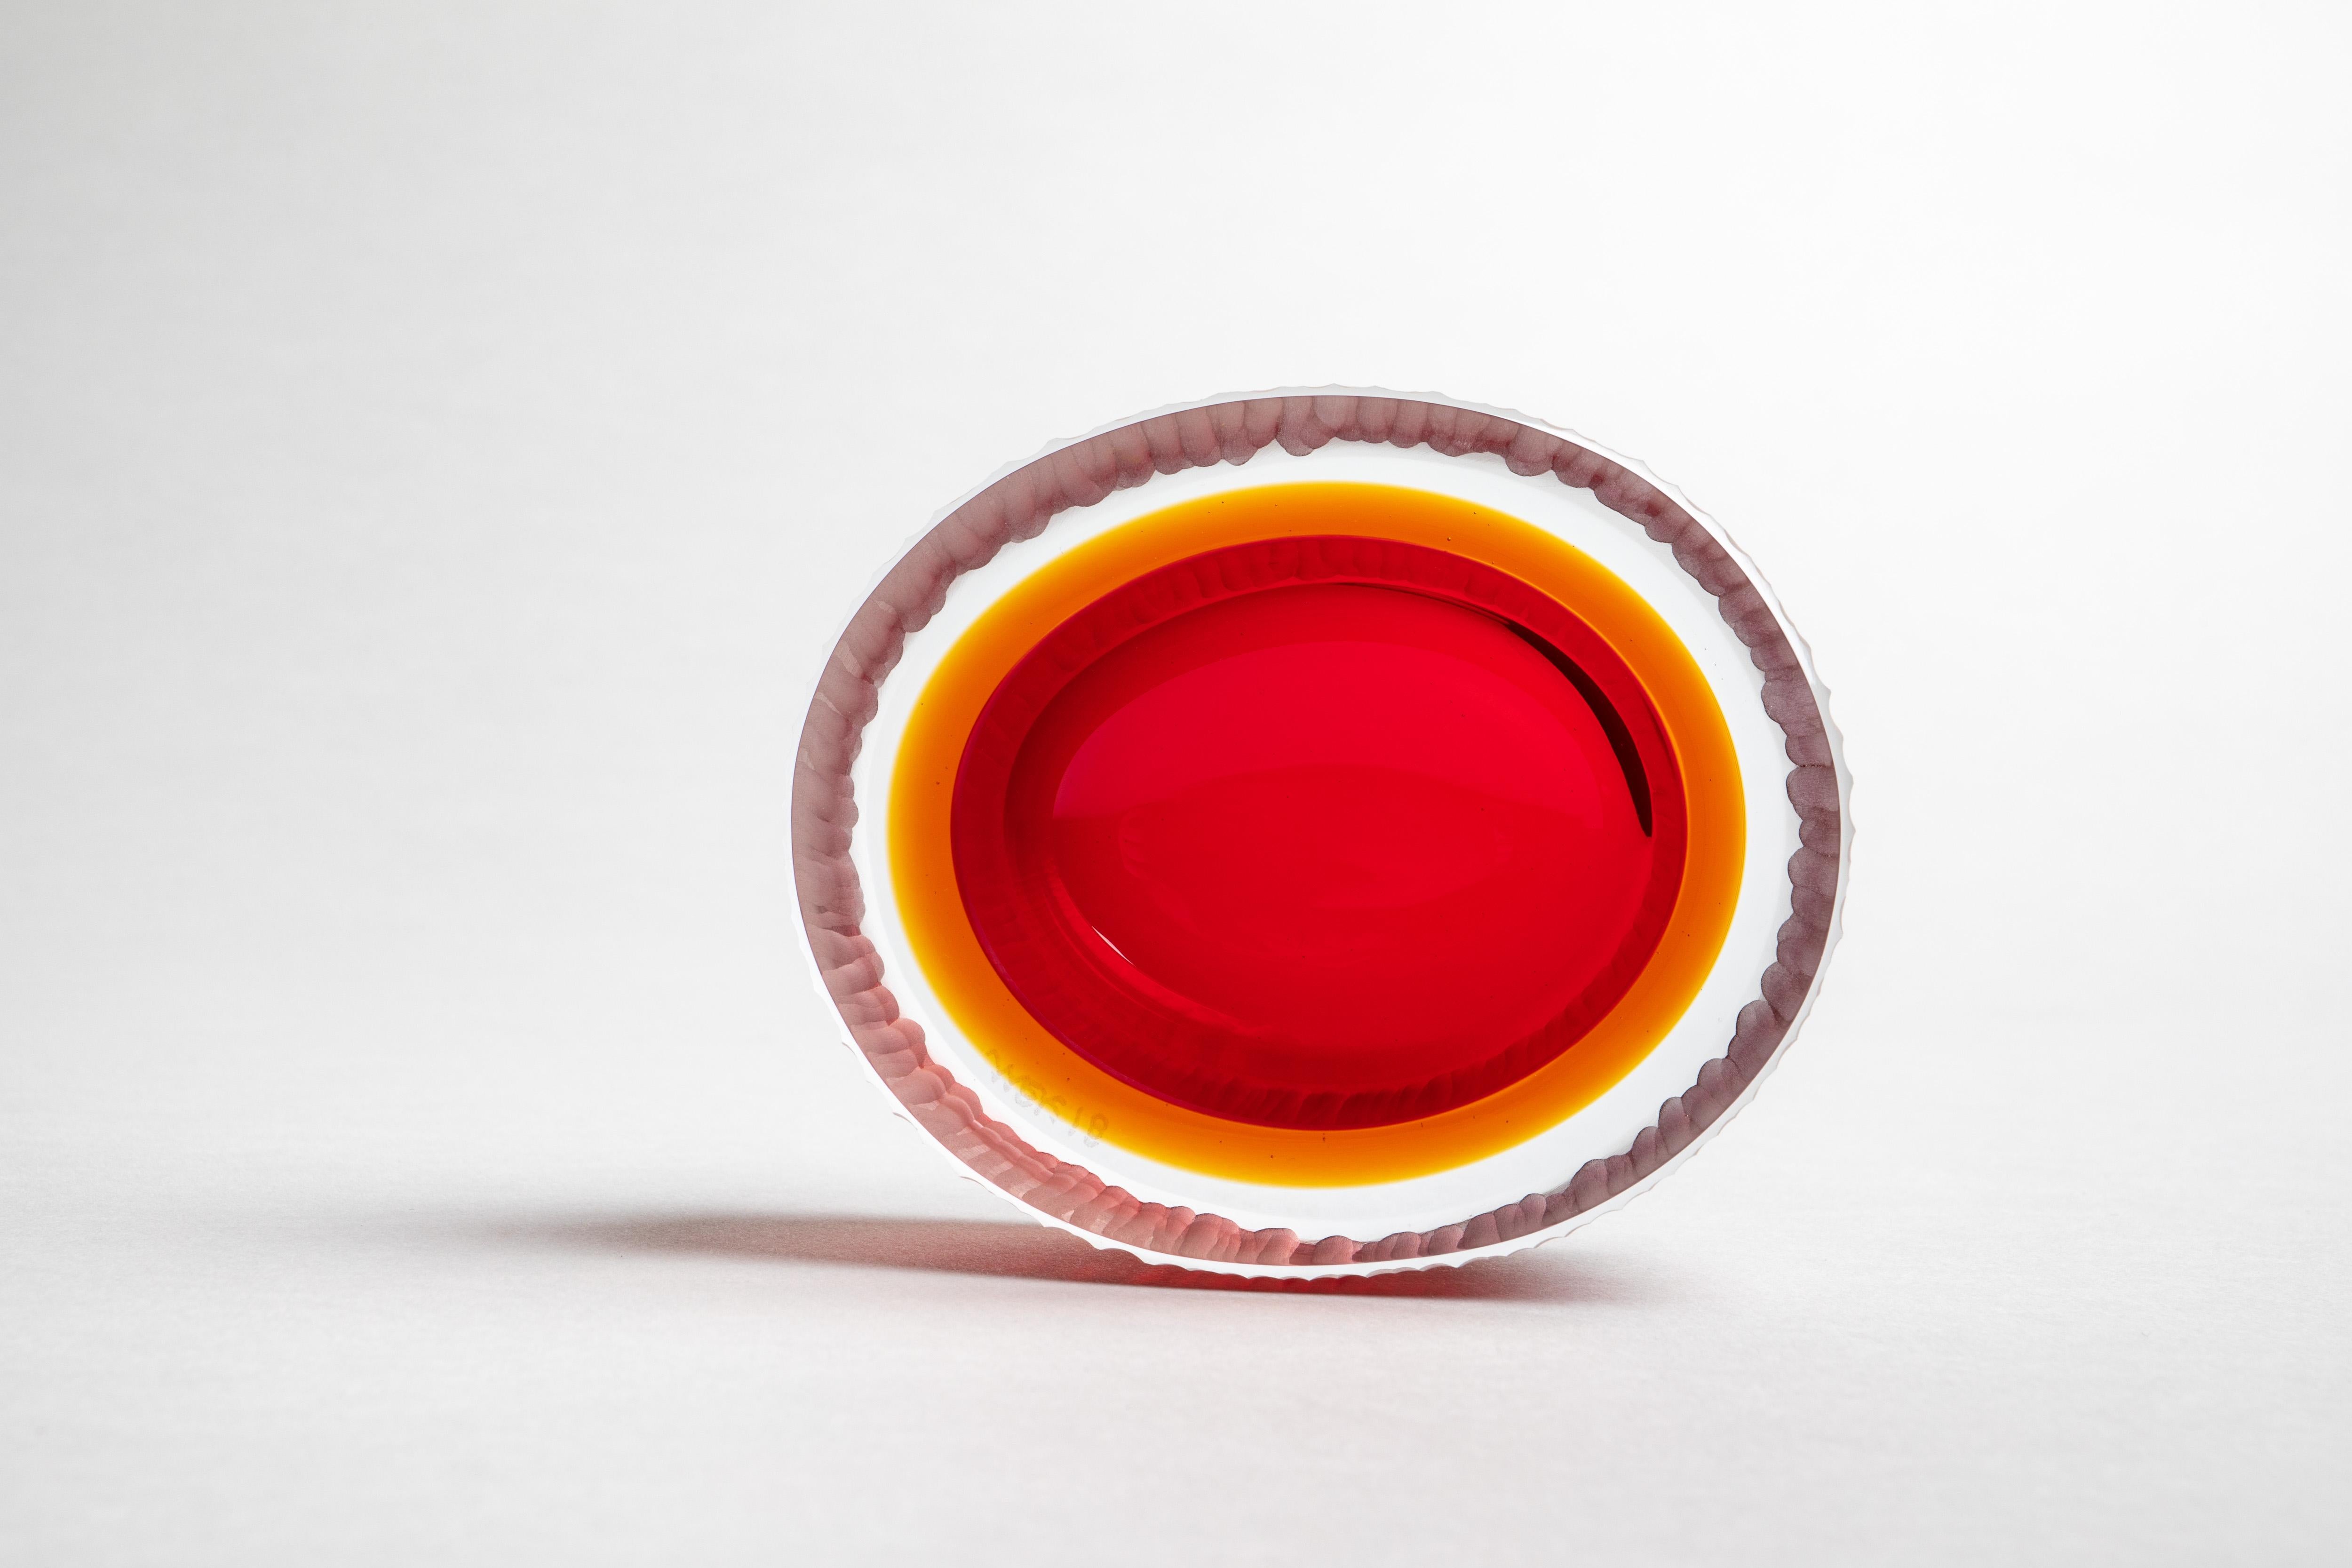 A small yet solid object with a strong presence, the Kasa Mignon is skillfully crafted by a glass master using a technique involving the layering of cristallo glass to a core of intense color. Once cooled the blown glass body is cut in half, hand